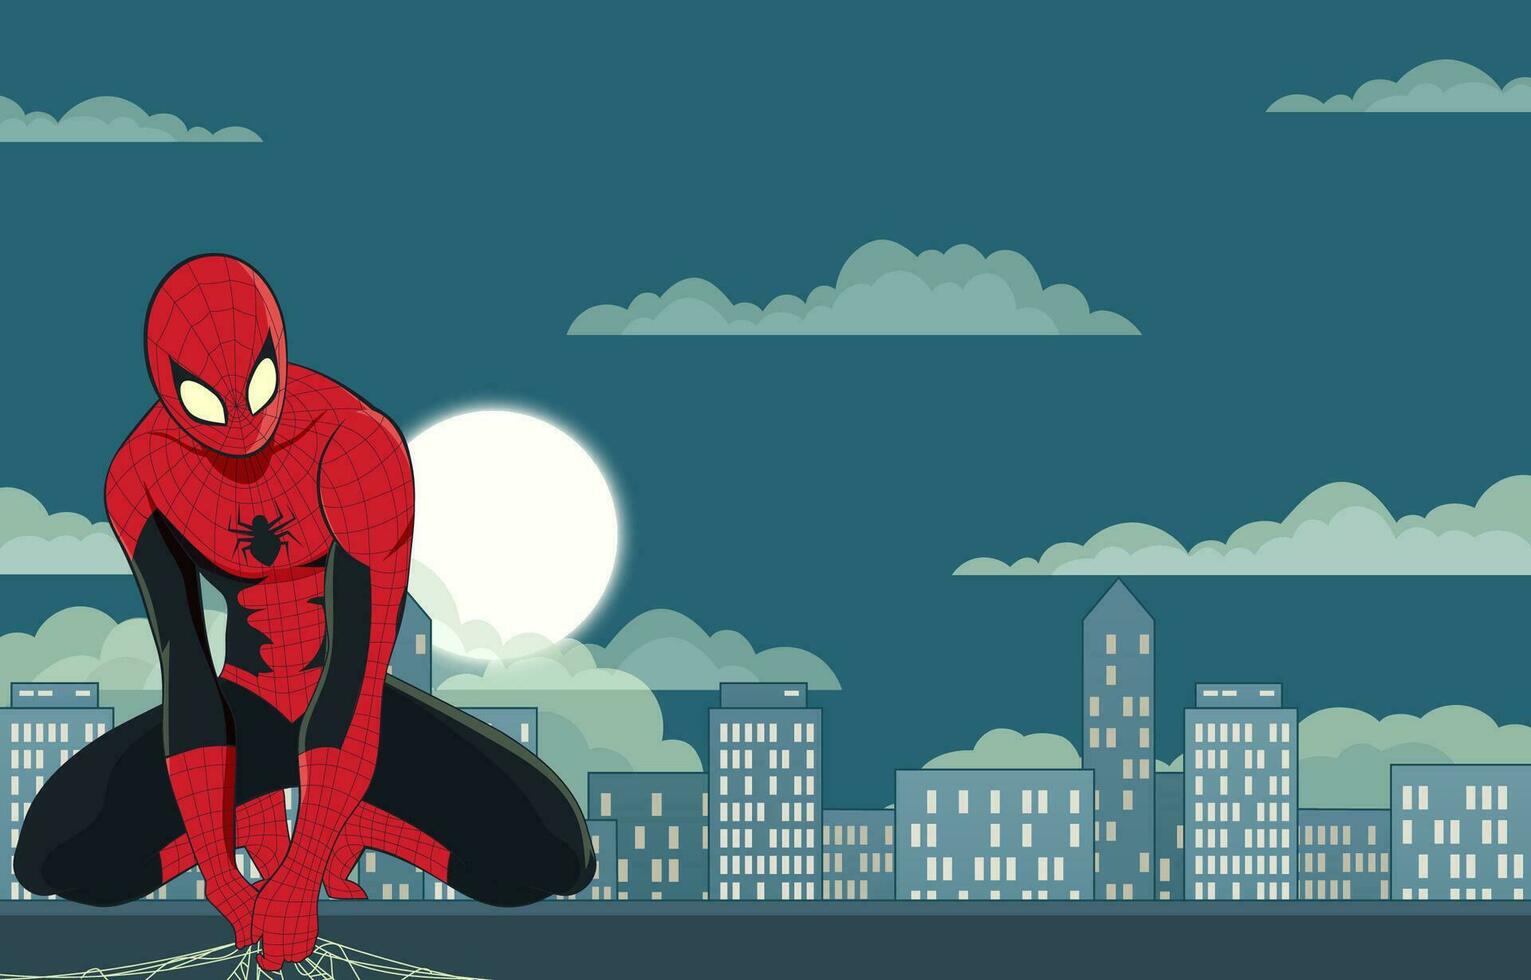 A Man With Costume On The Top of Building Background vector